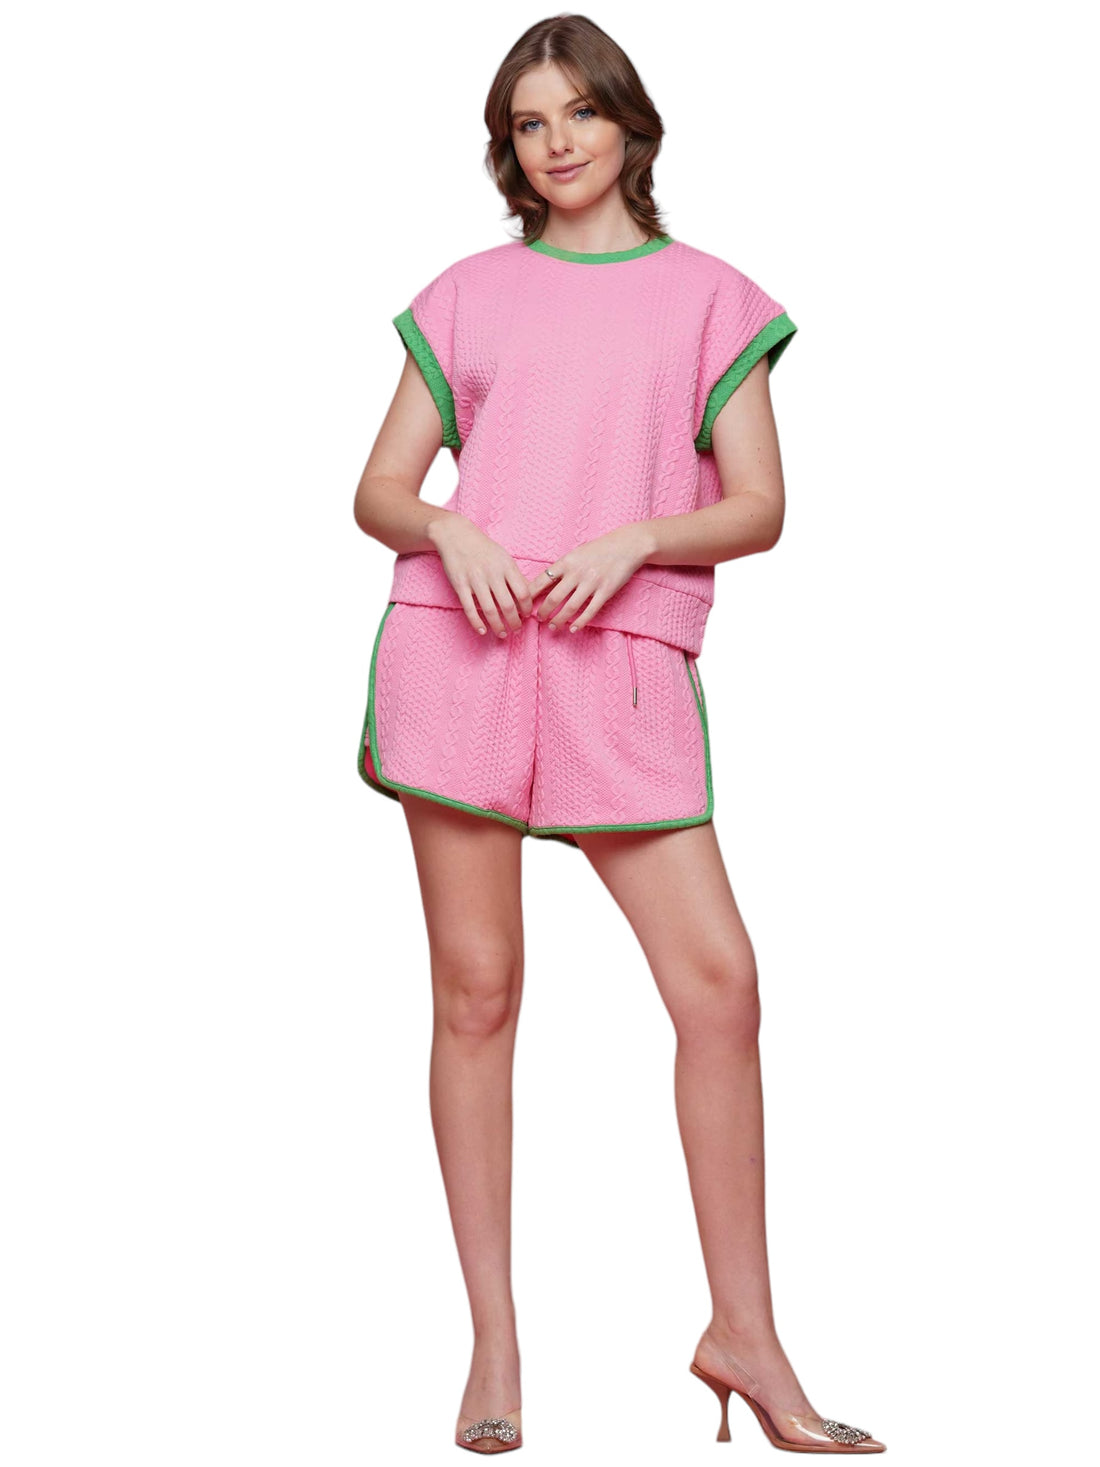 Why Dress | Pink/green Top